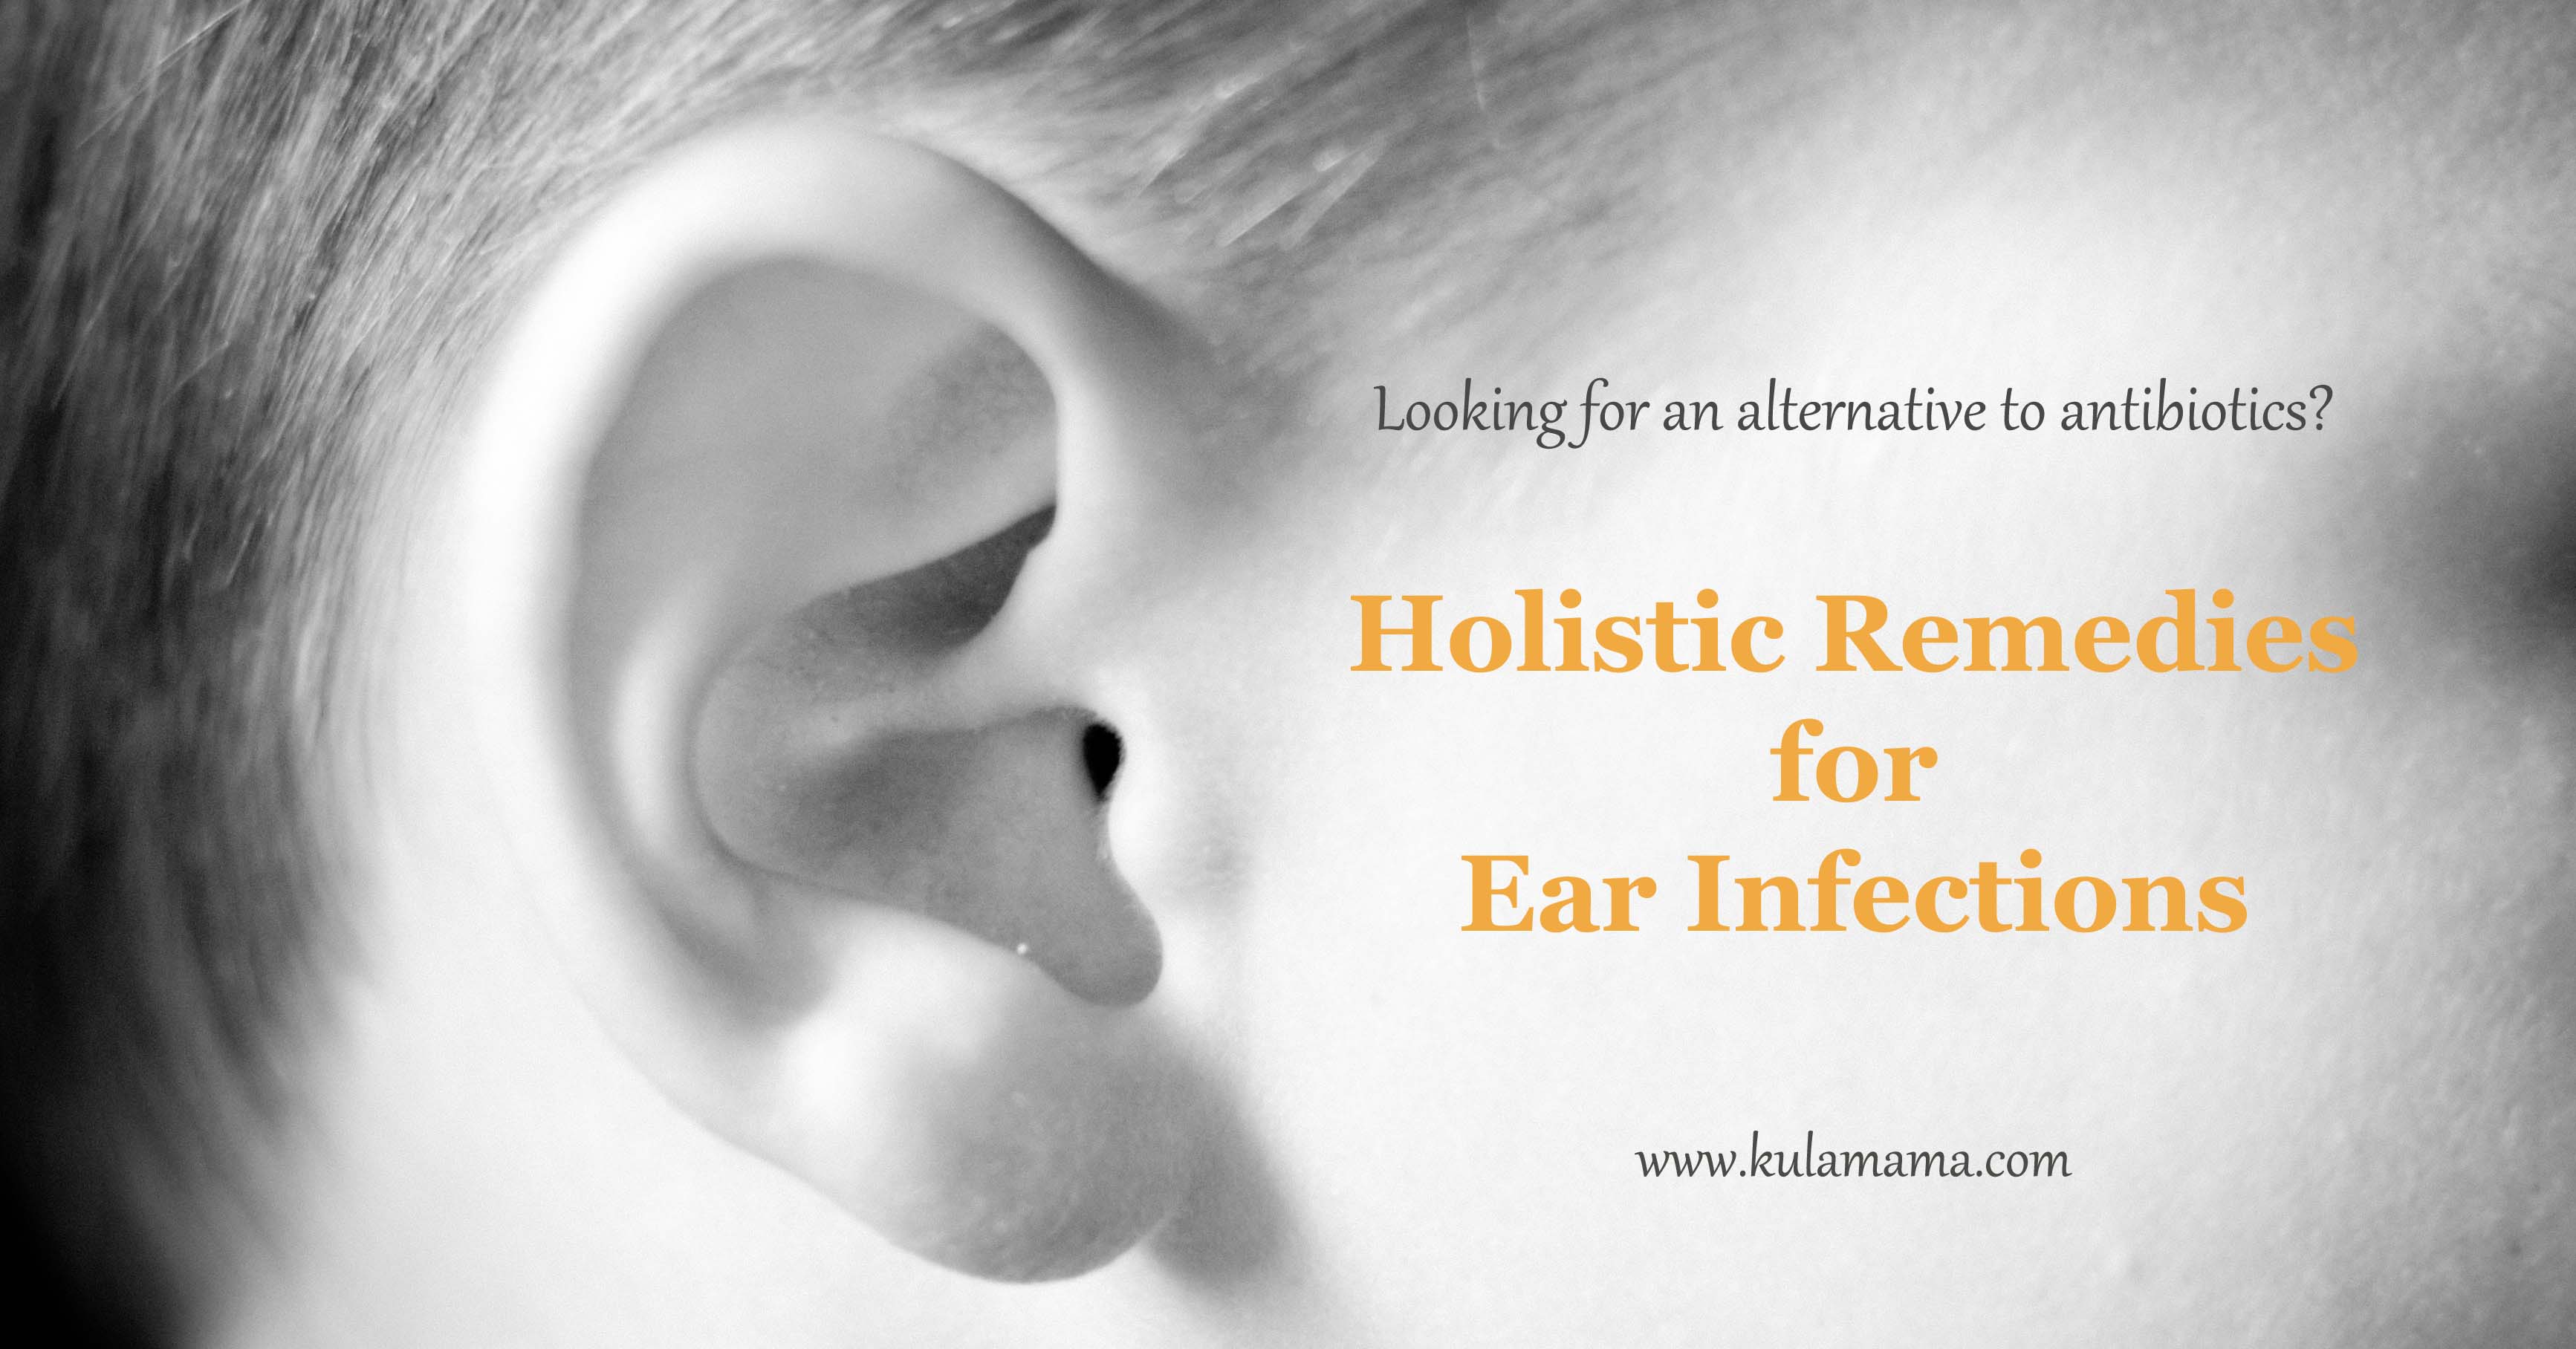 Holistic Remedies for Ear Infections